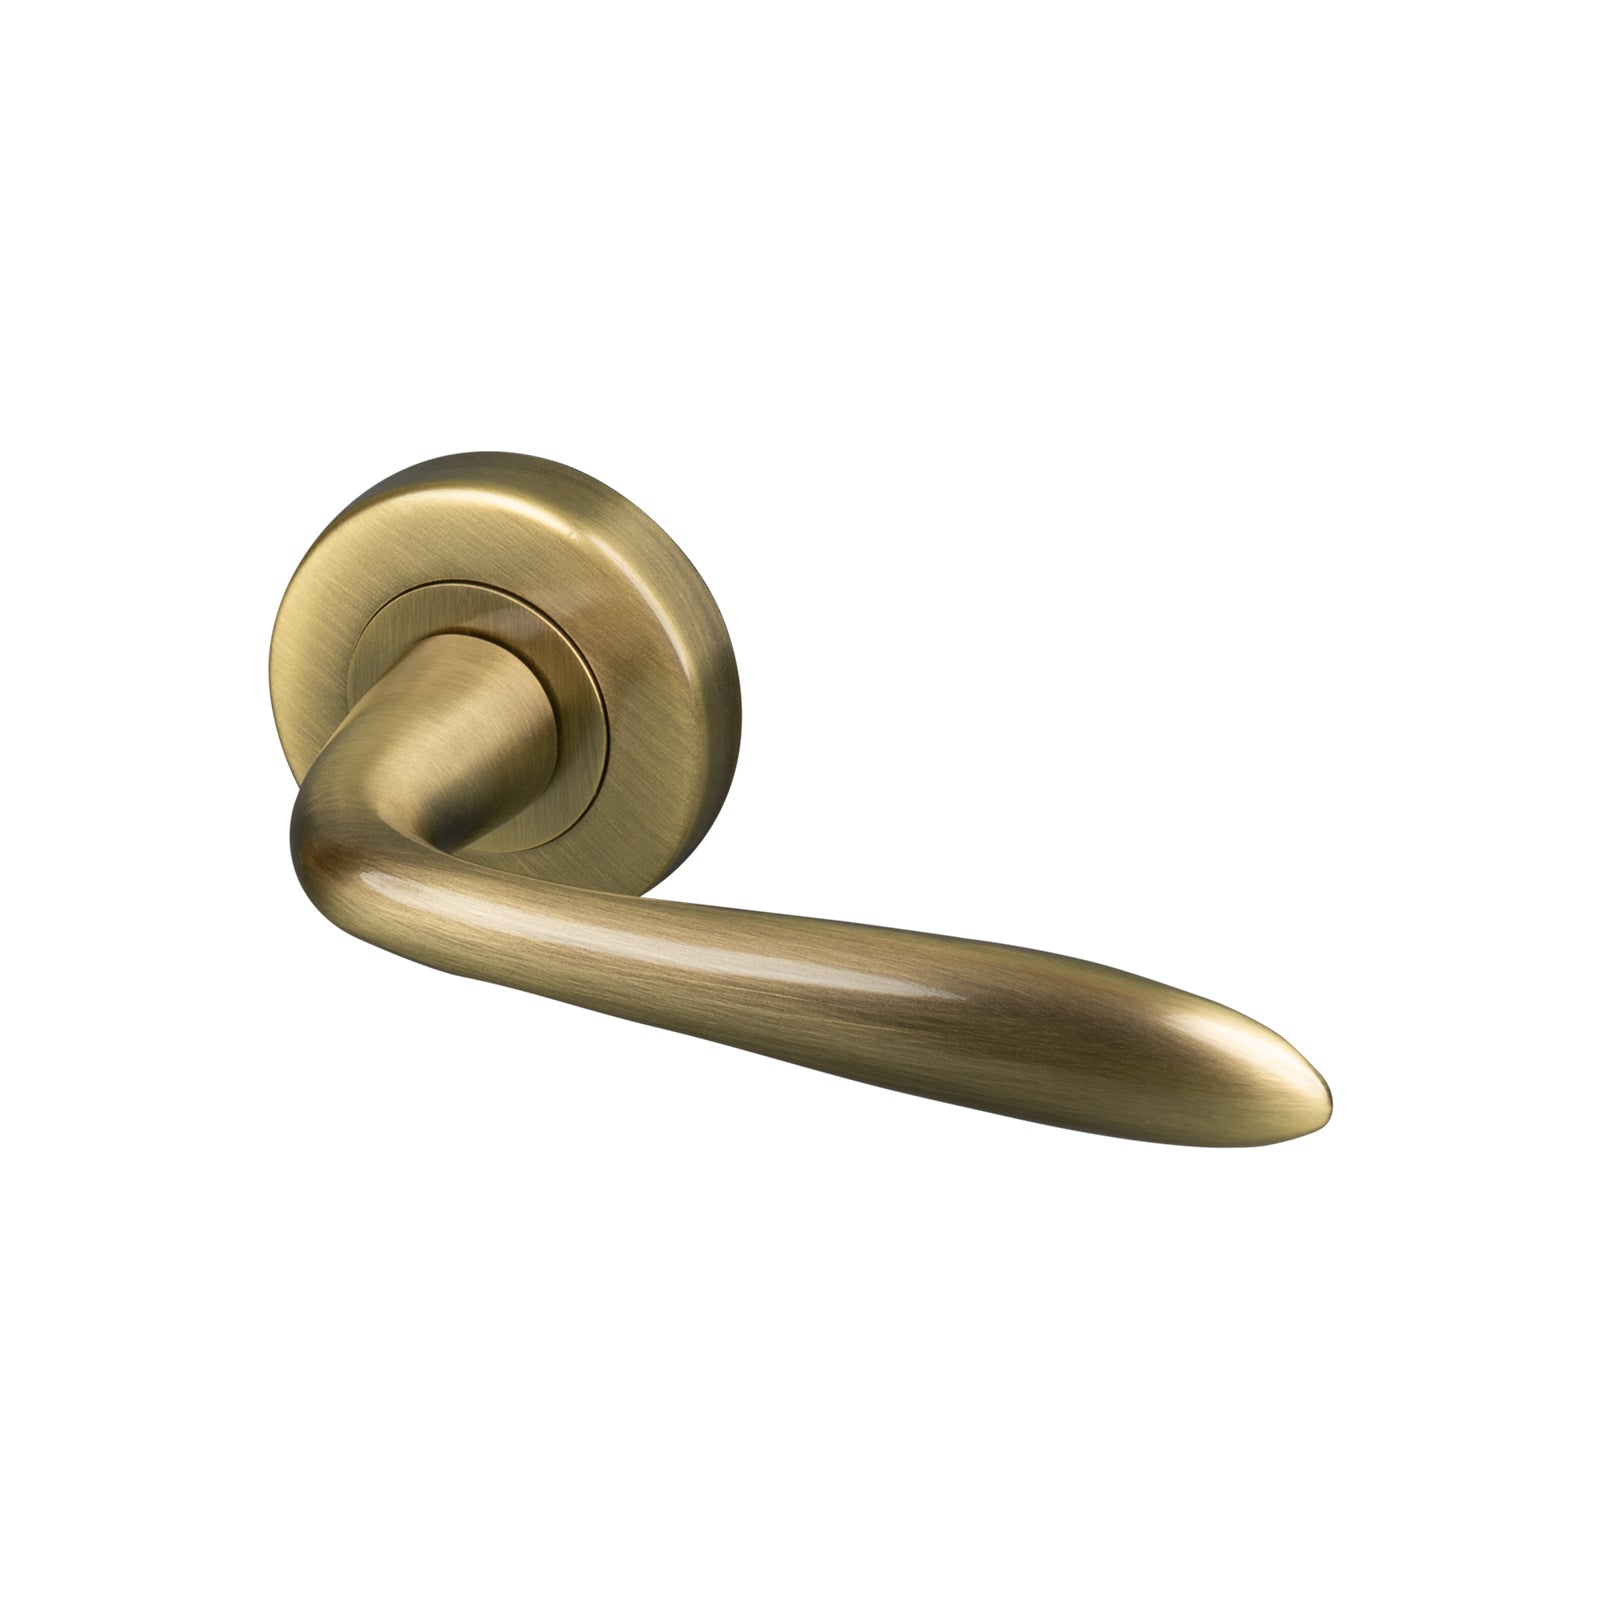 aged brass Sutton round rose door handle, concealed fixings SHOW